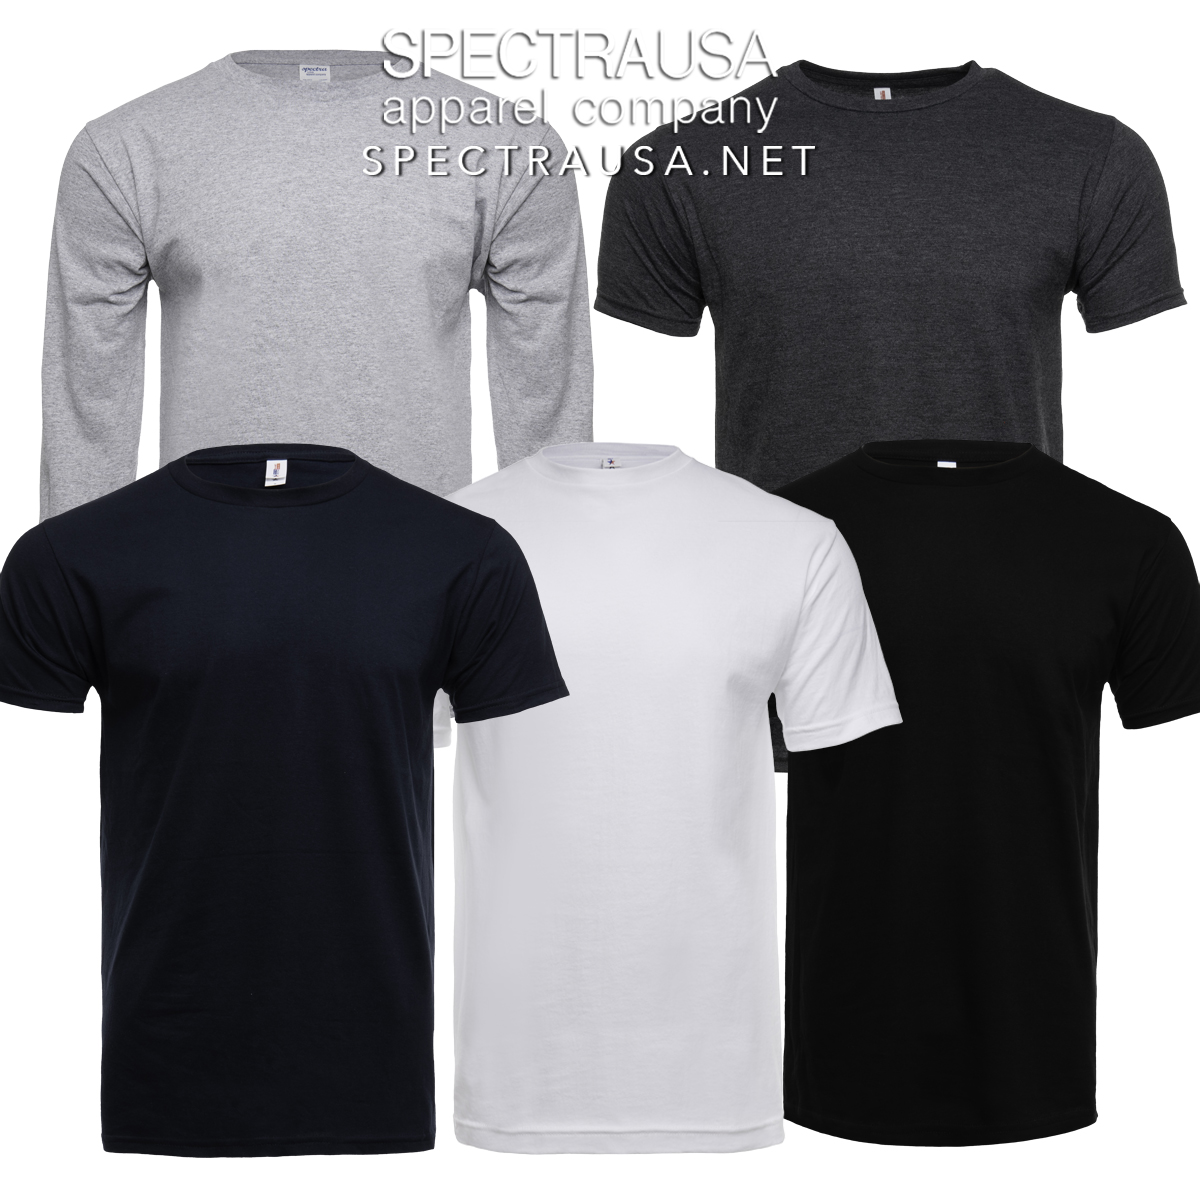 Sample pack of 5 Spectra wholesale t-shirts